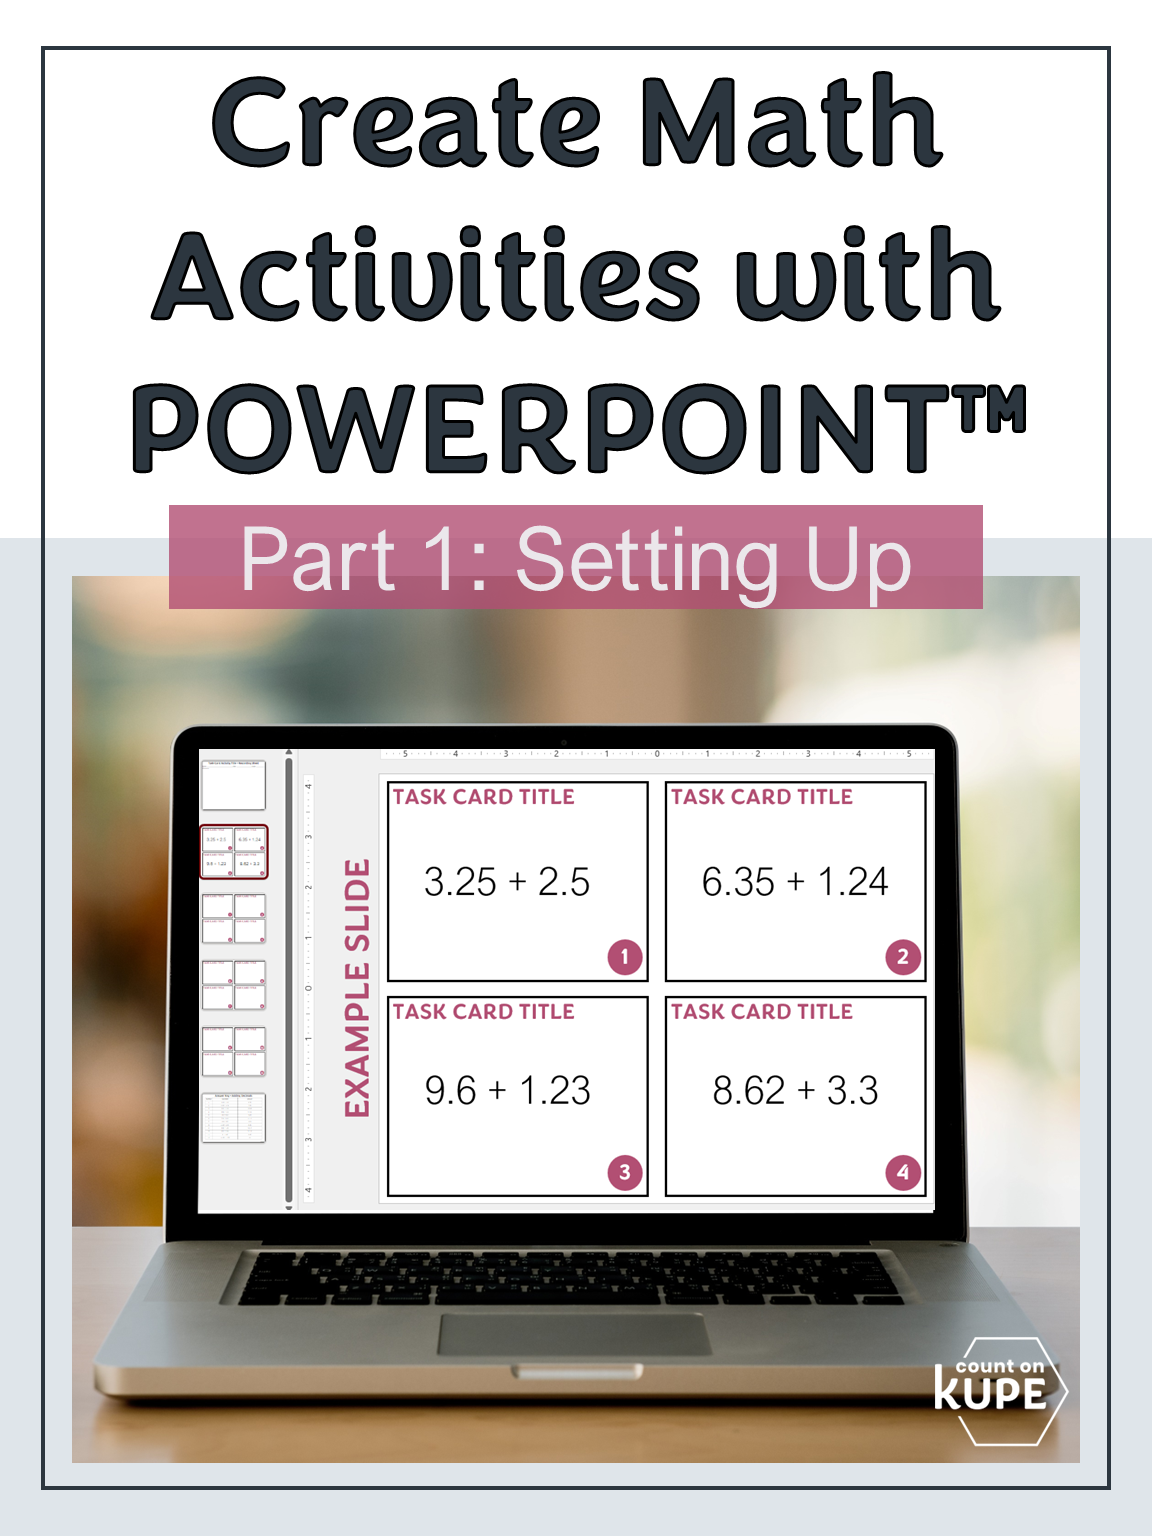 Create Math Activities with PowerPoint™